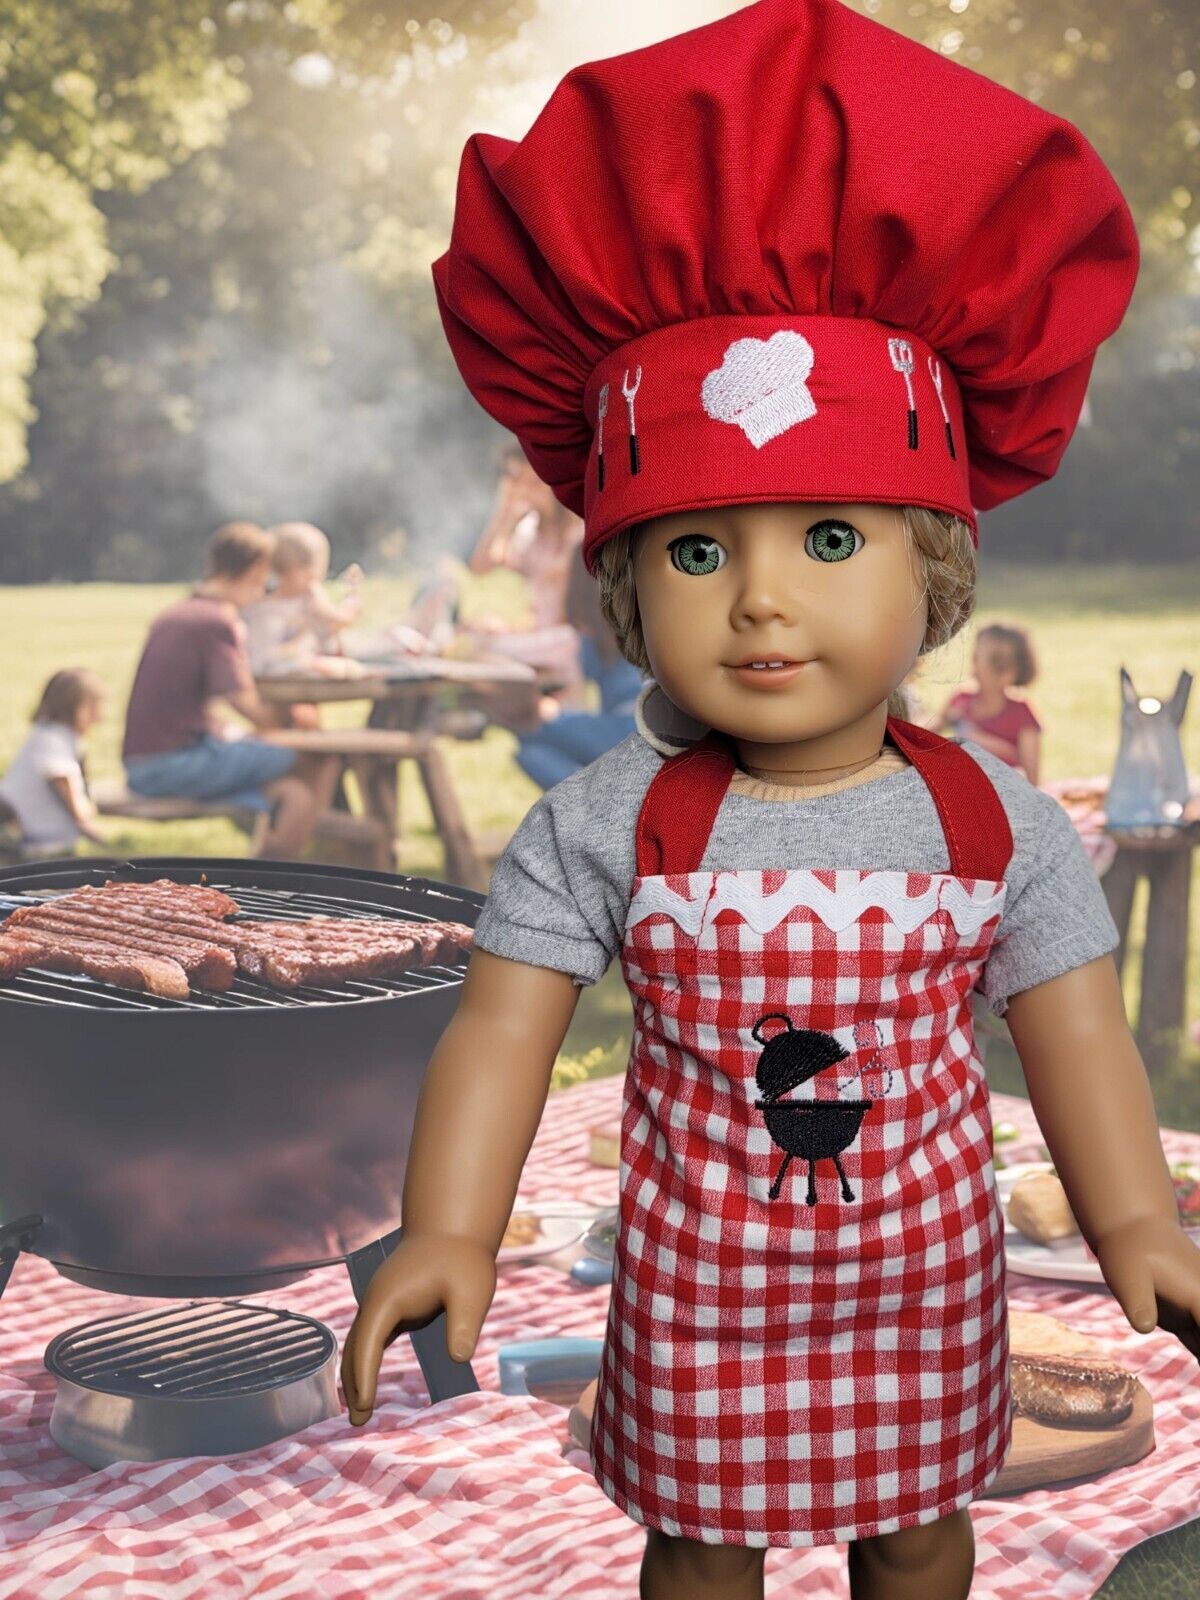 Primary image for Doll Clothes Barbecue Apron Set and Chef Hat fits 18" American Girl Dolls Picnic